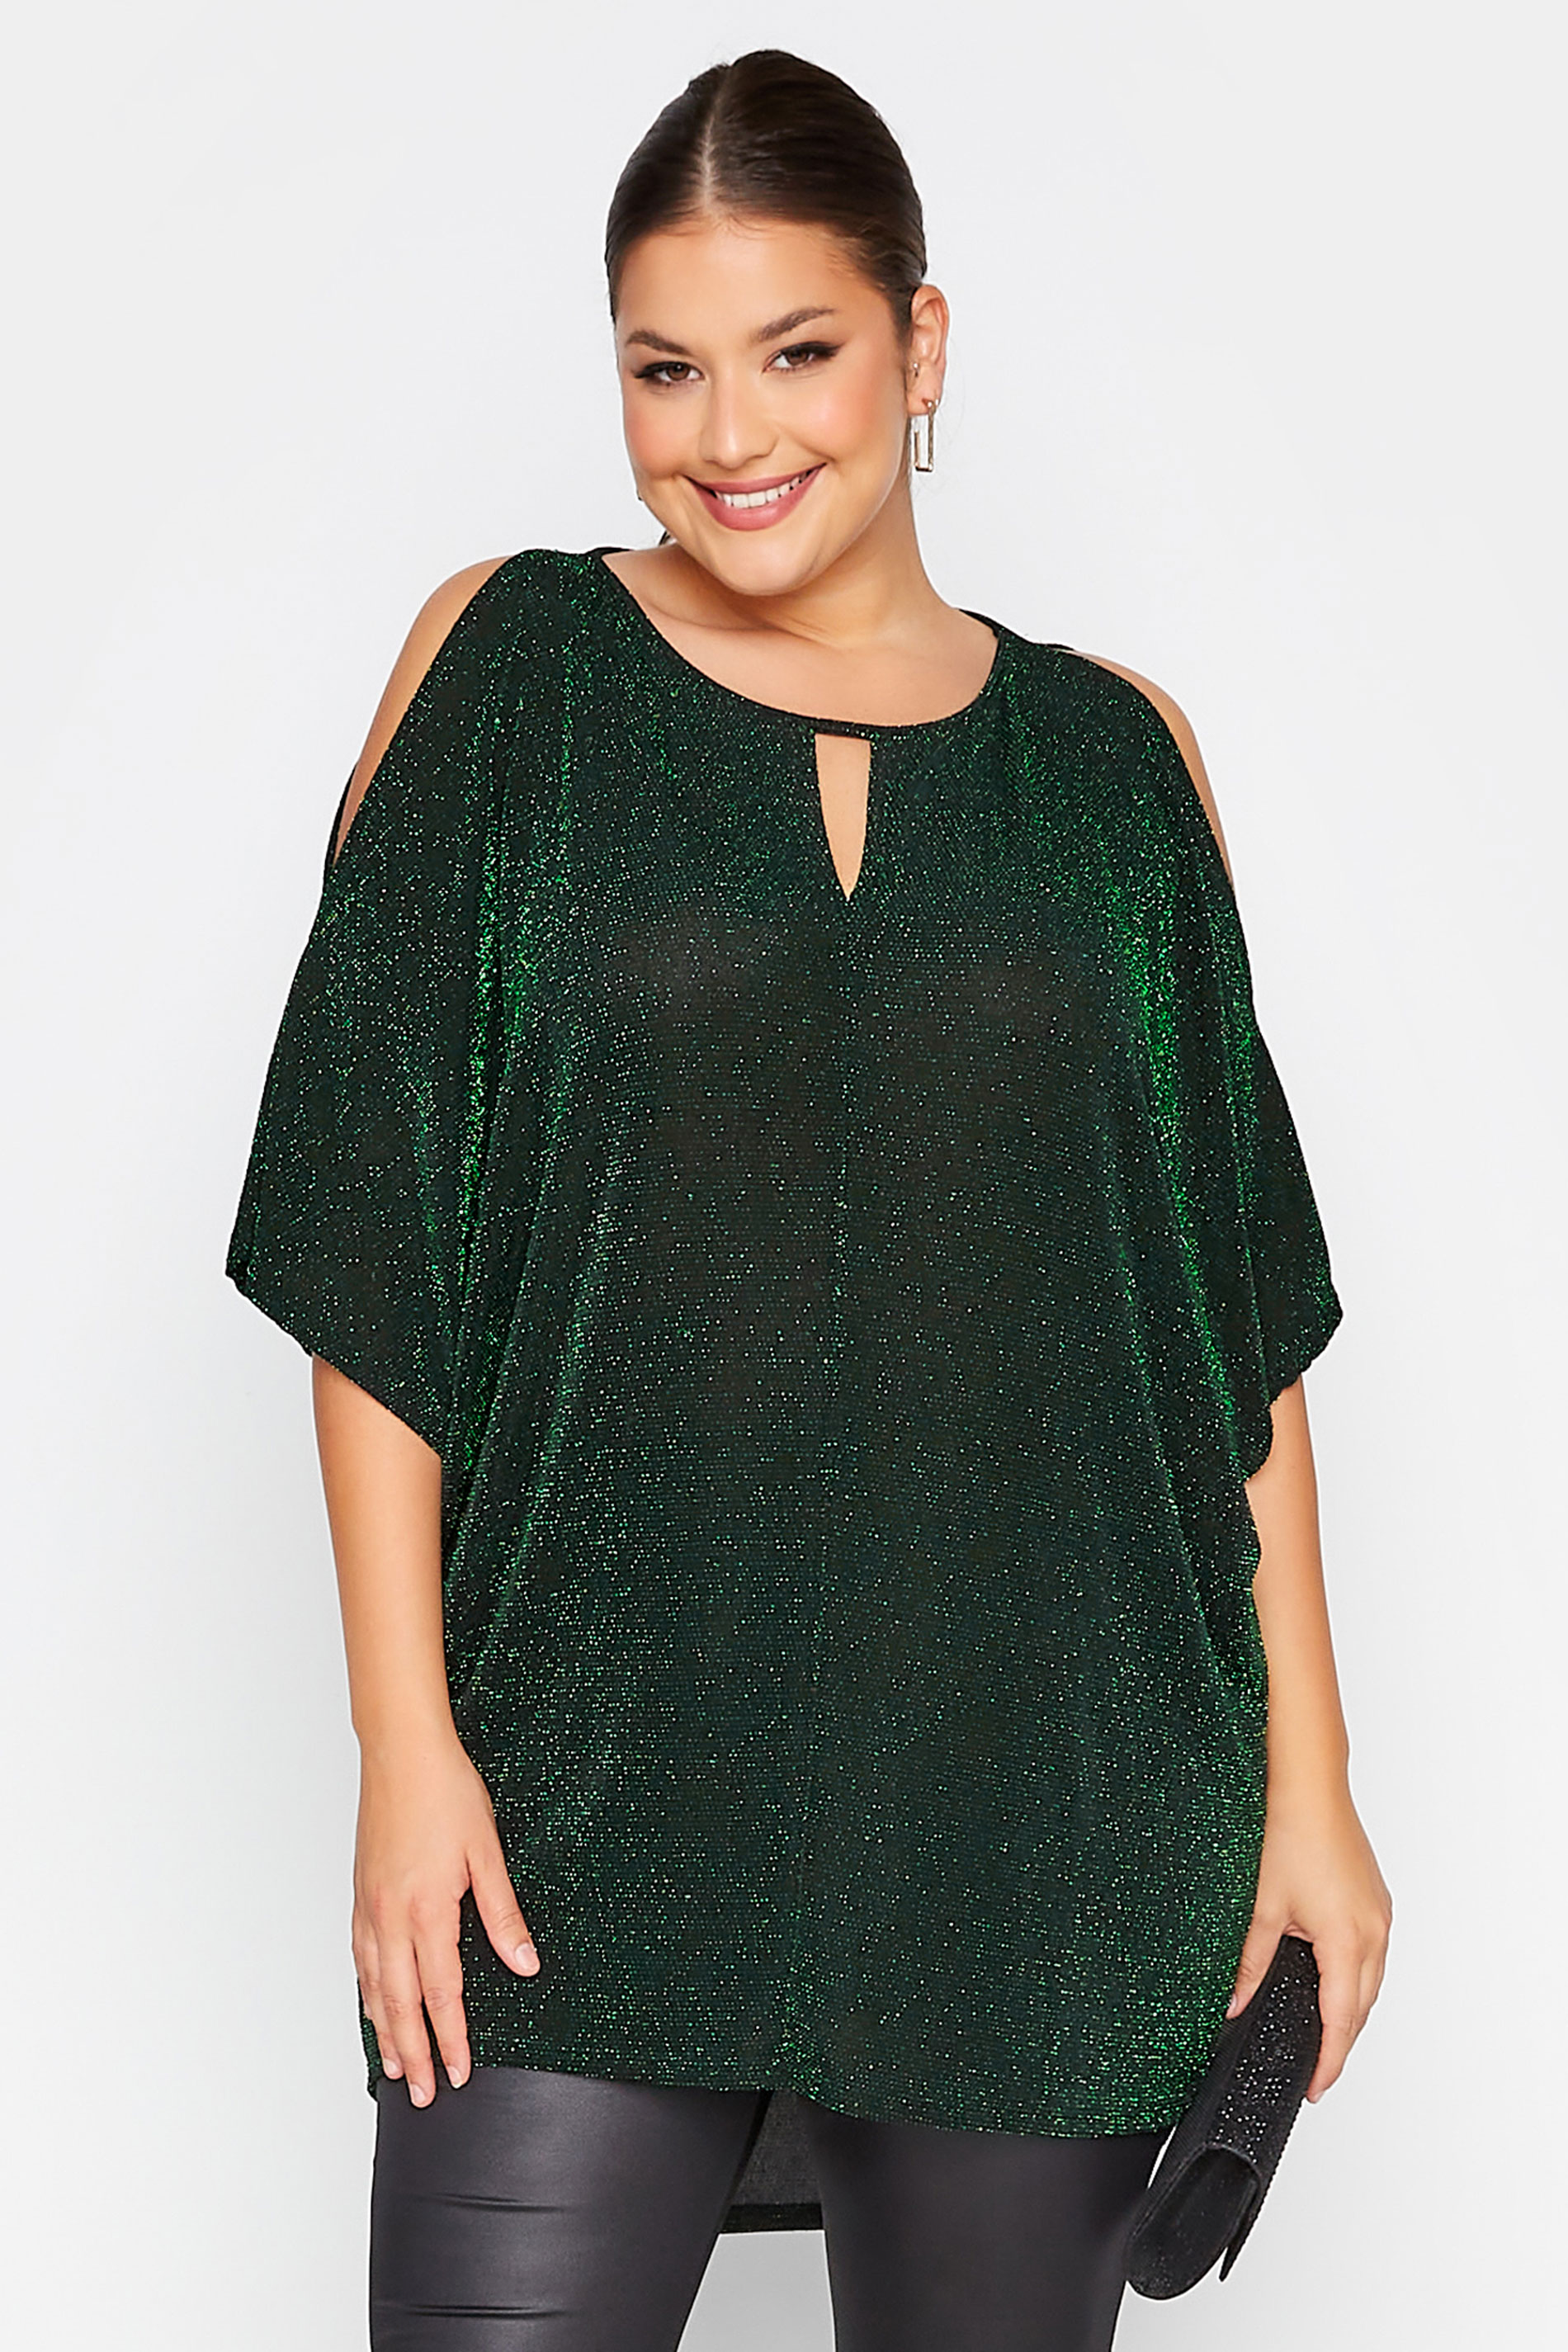 YOURS LONDON Plus Size Green Glitter Cold Shoulder Cape Top | Yours Clothing 1